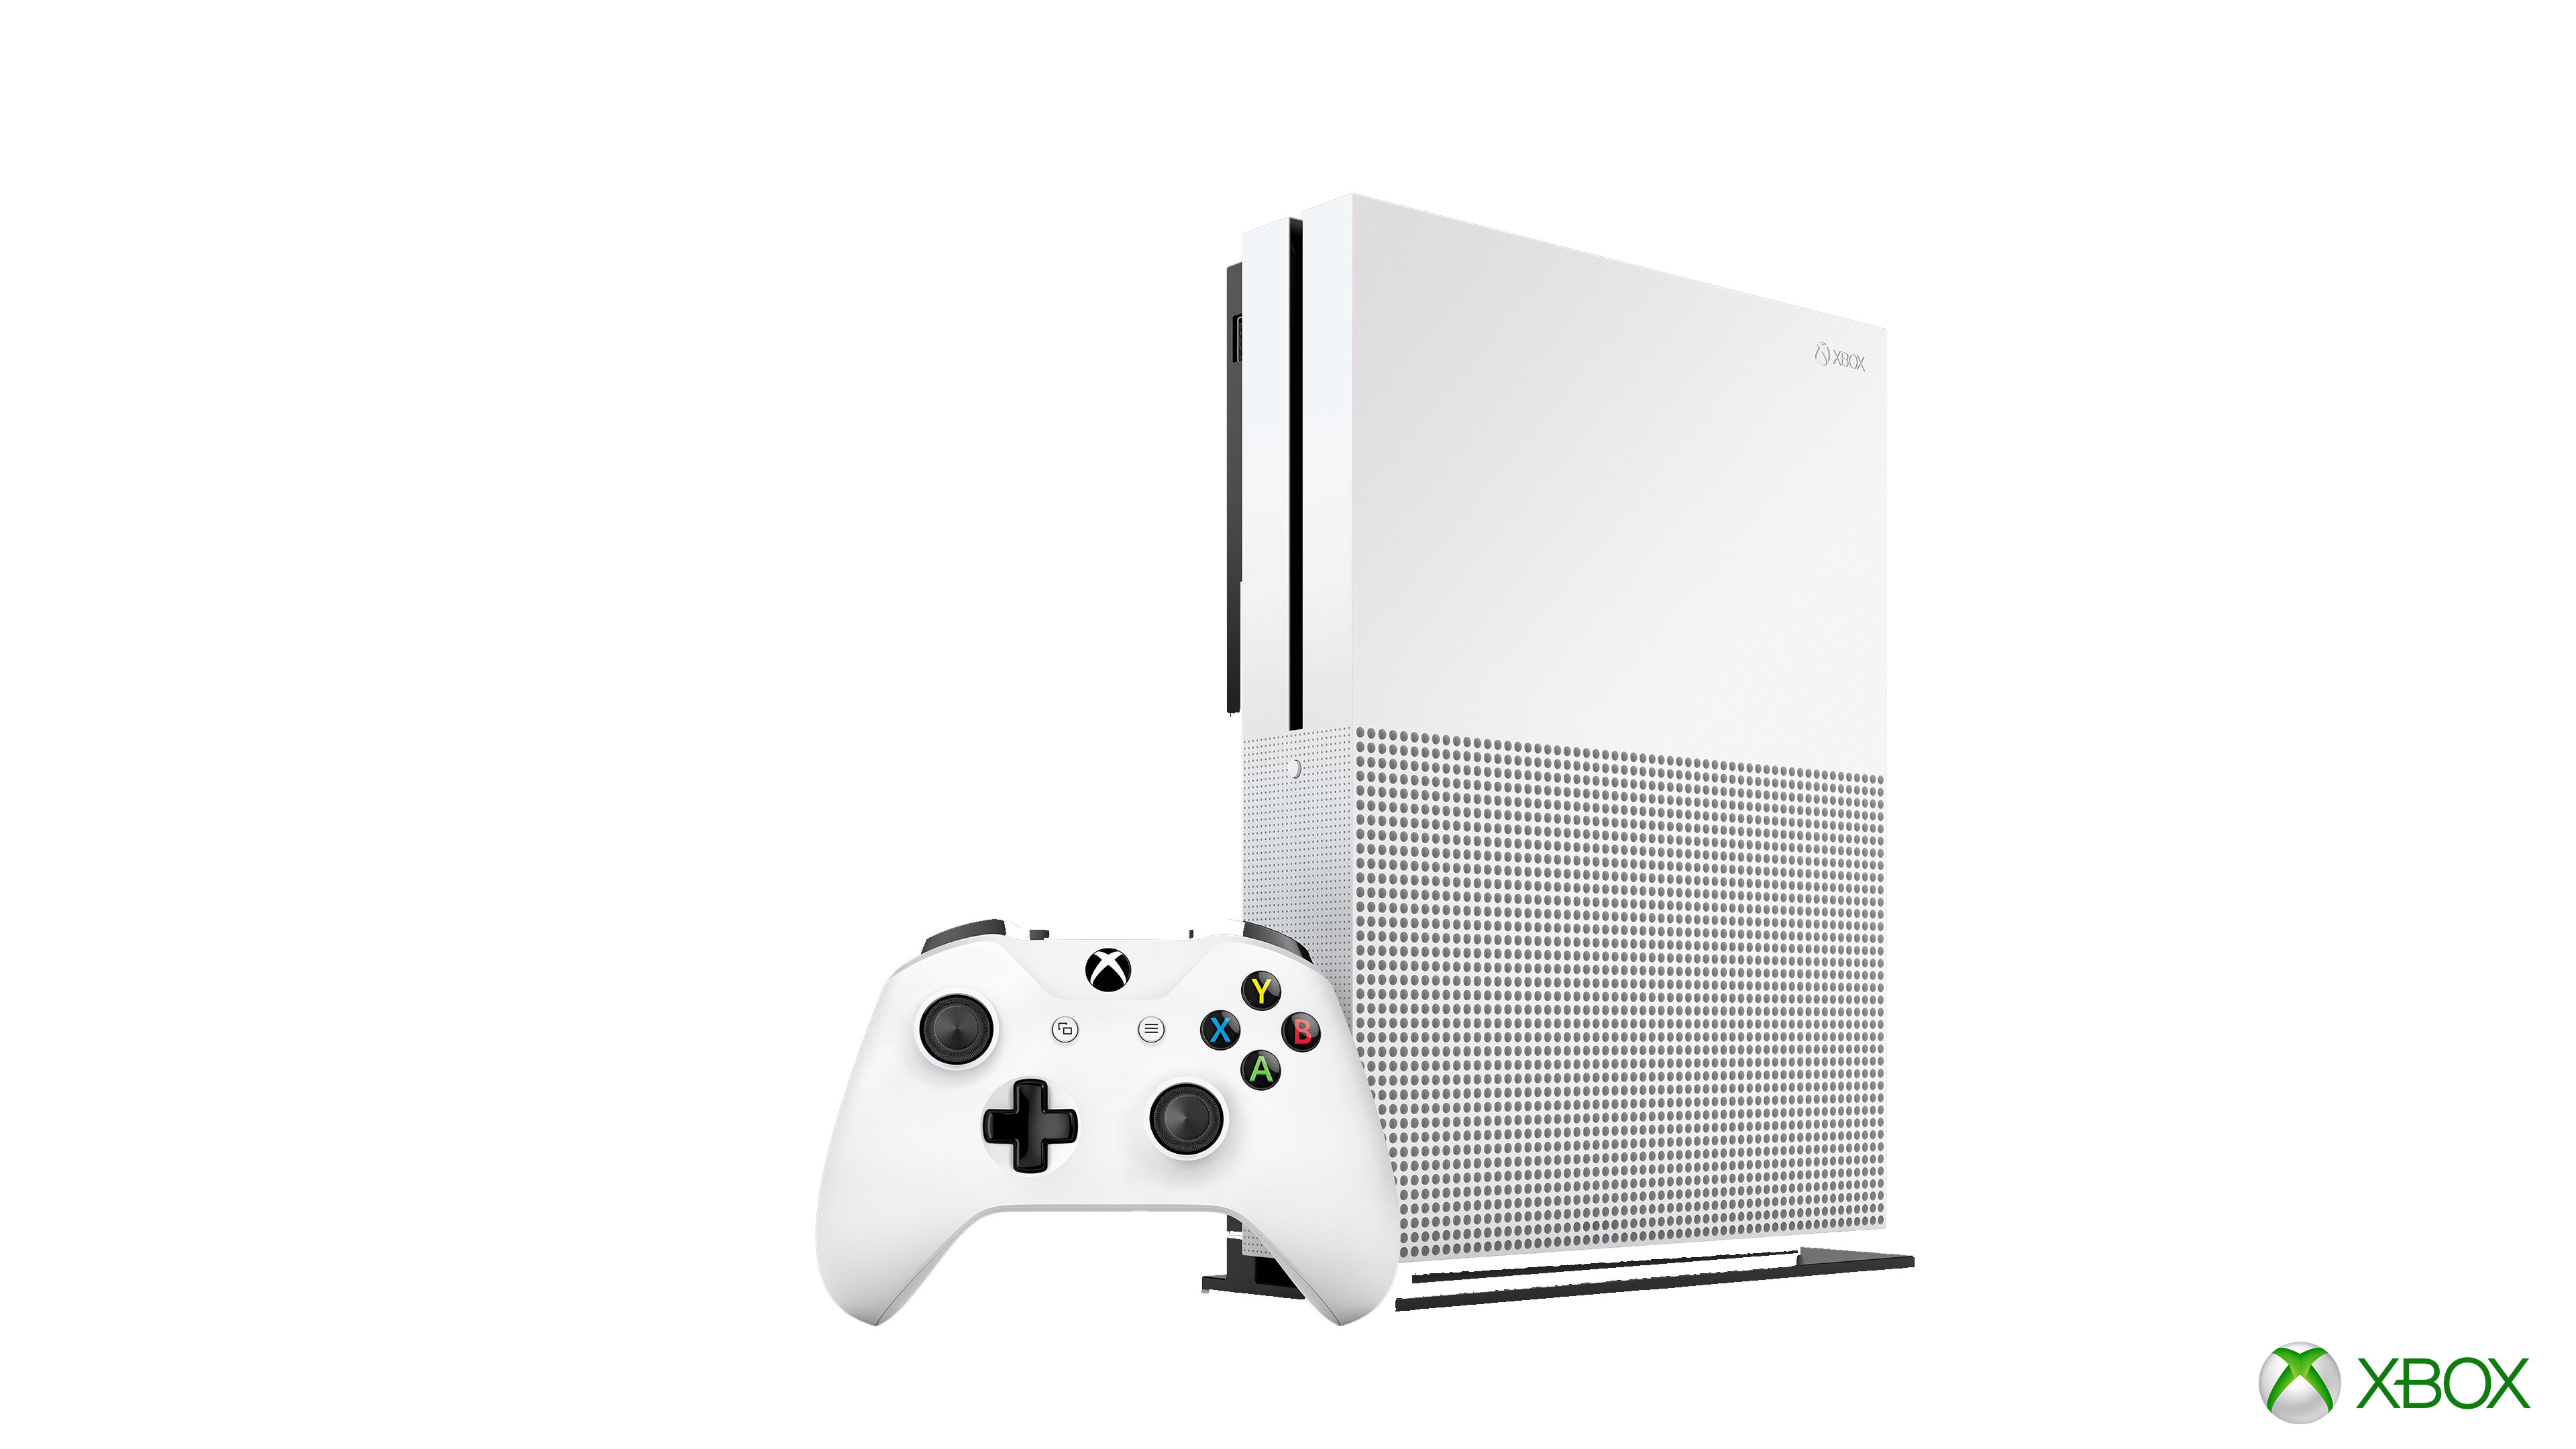 Xbox: A video game console, Slimmer design, Support for 4K Ultra HD video streaming. 3840x2160 4K Wallpaper.